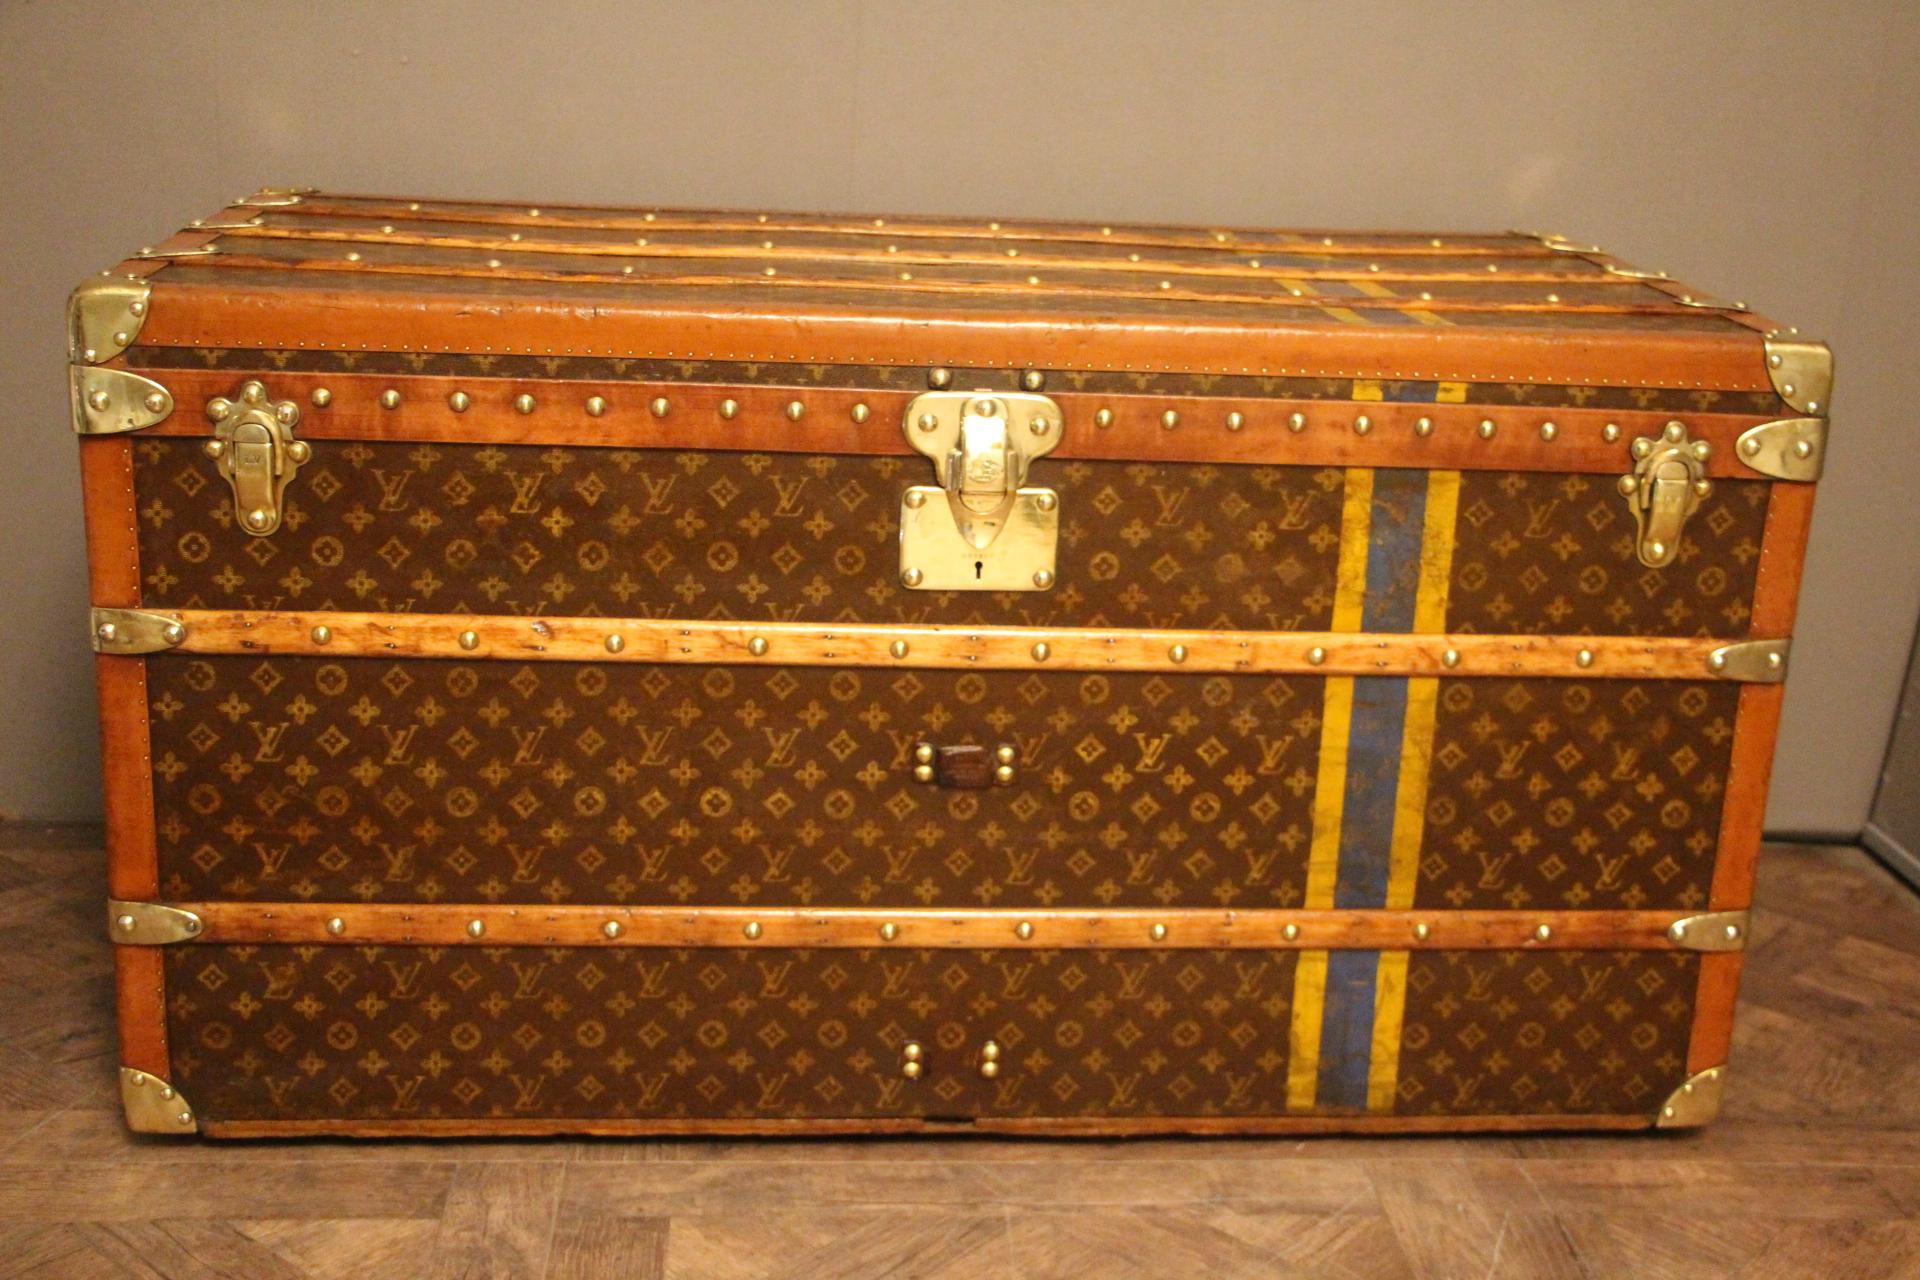 This superb Louis Vuitton steamer trunk features stenciled monogram canvas, lozine trim, LV stamped solid brass locks and studs as well as leather side handles and brass corners. It has got a beautiful original patina and is very elegant.
Blue and